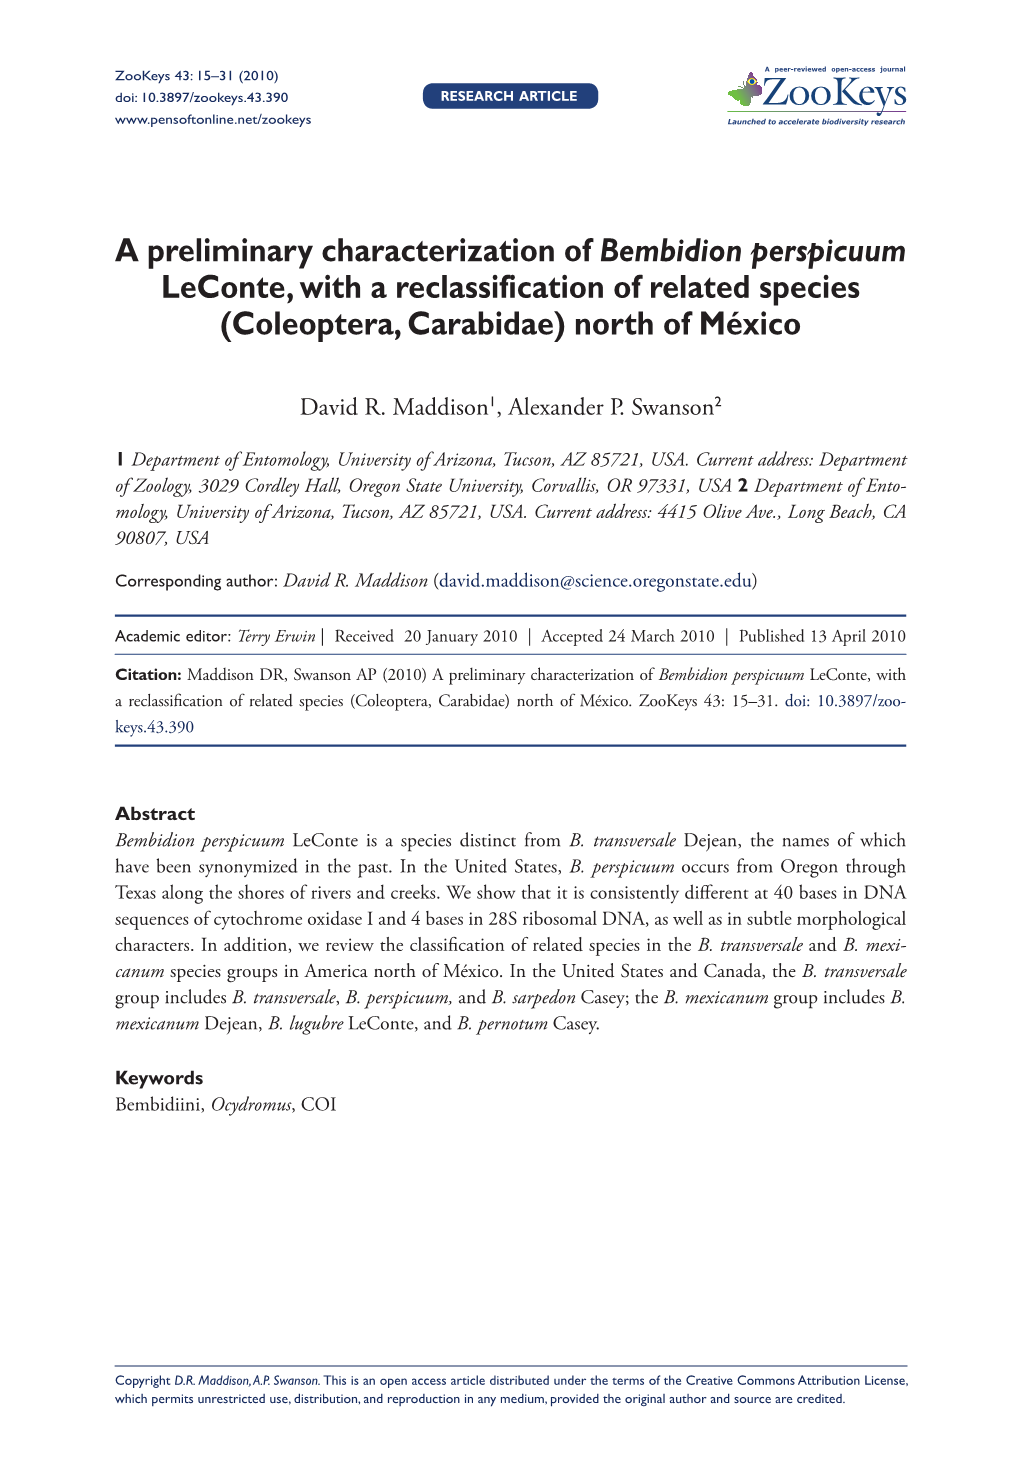 A Preliminary Characterization of Bembidion Perspicuum Leconte, with a Reclassification of Related Species (Coleoptera, Carabidae) North of México